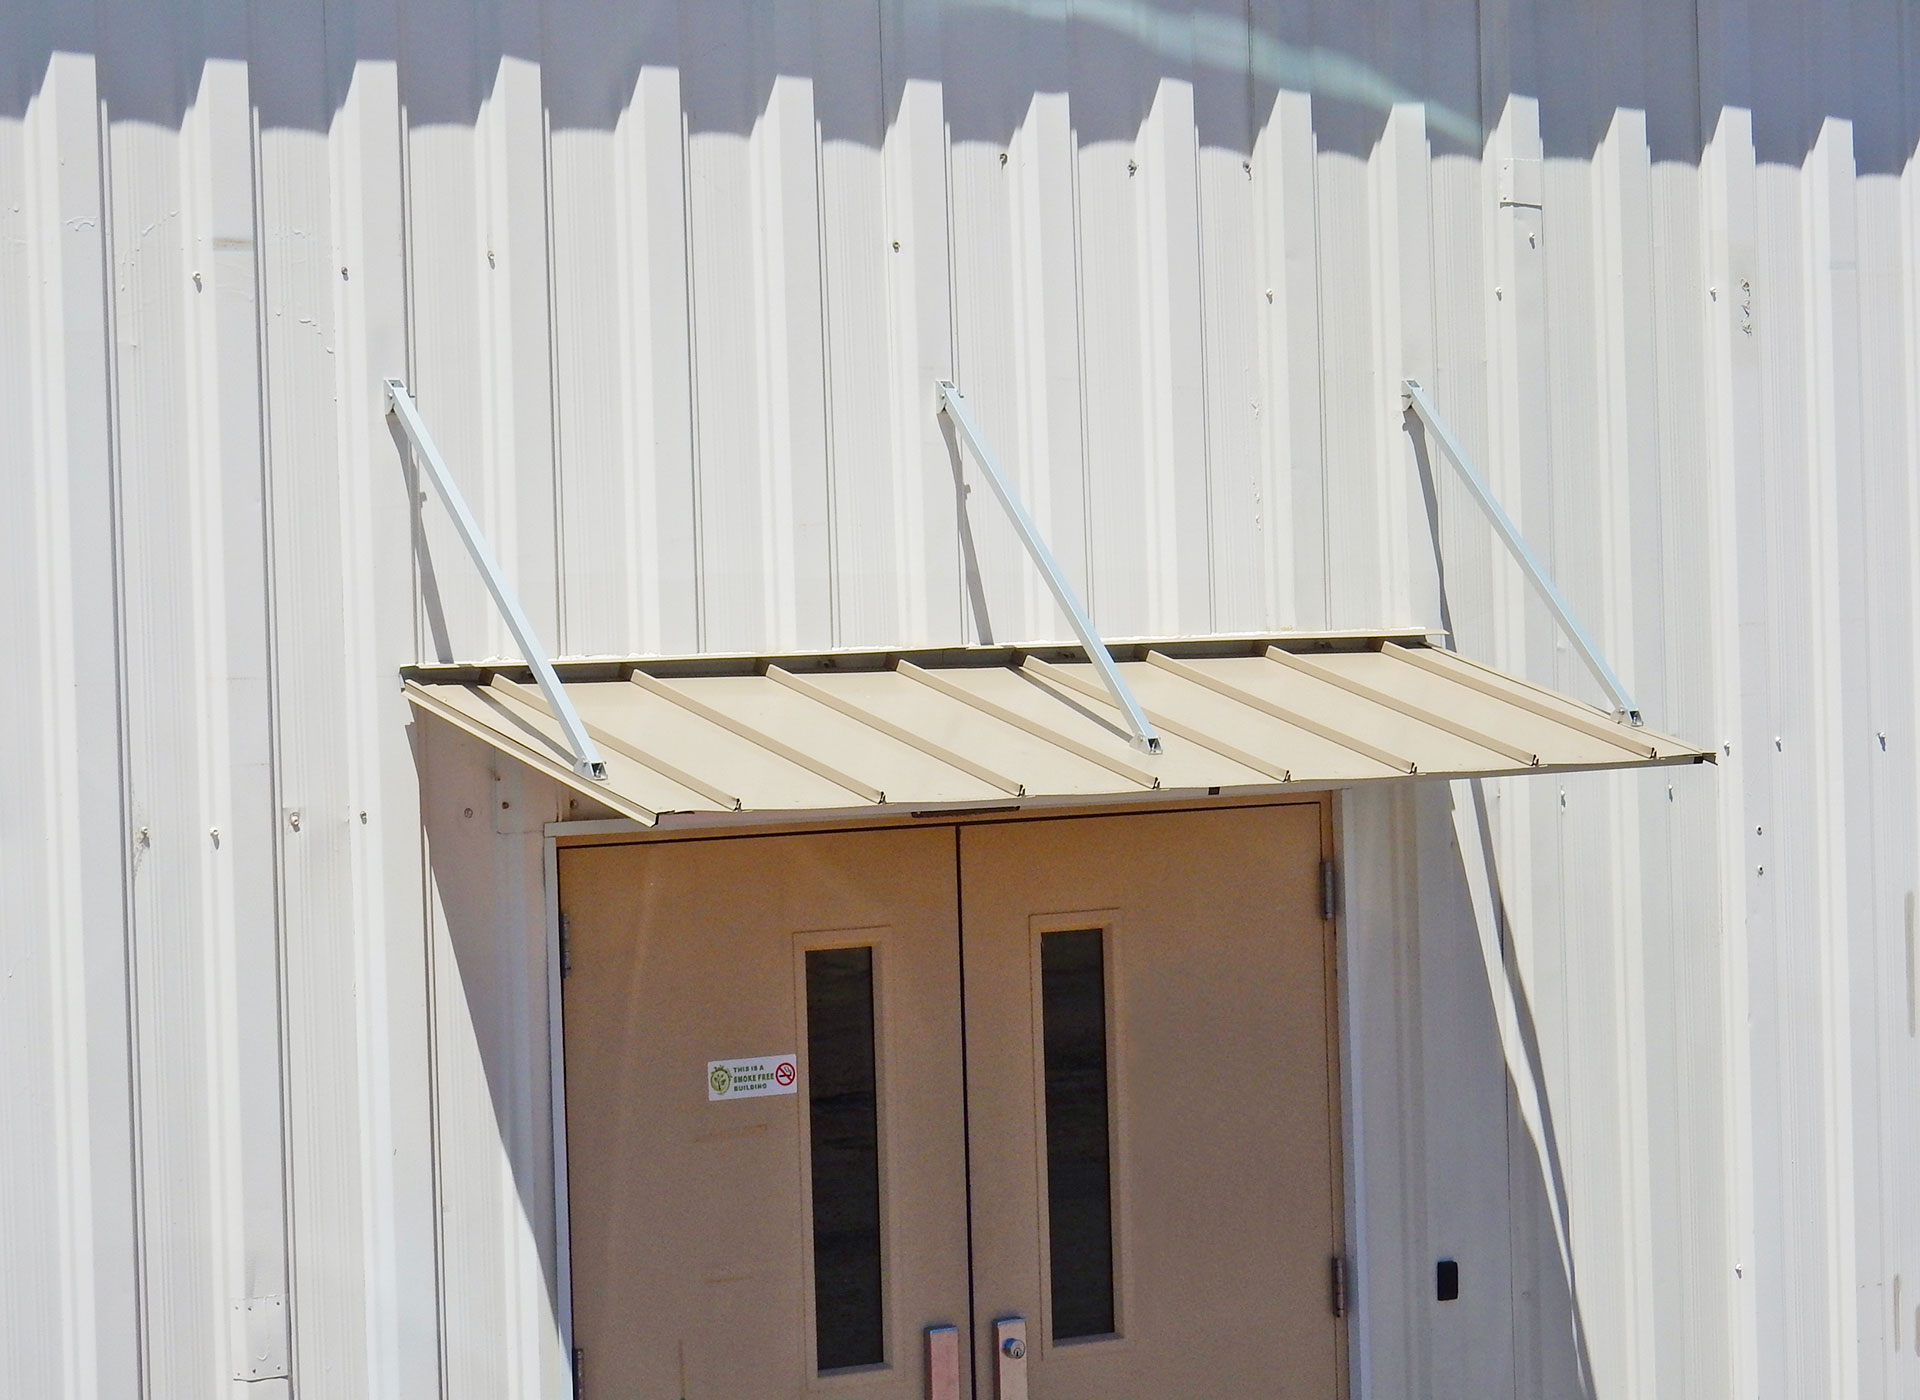 Austin Standing Seam Awning with Overhead Braces